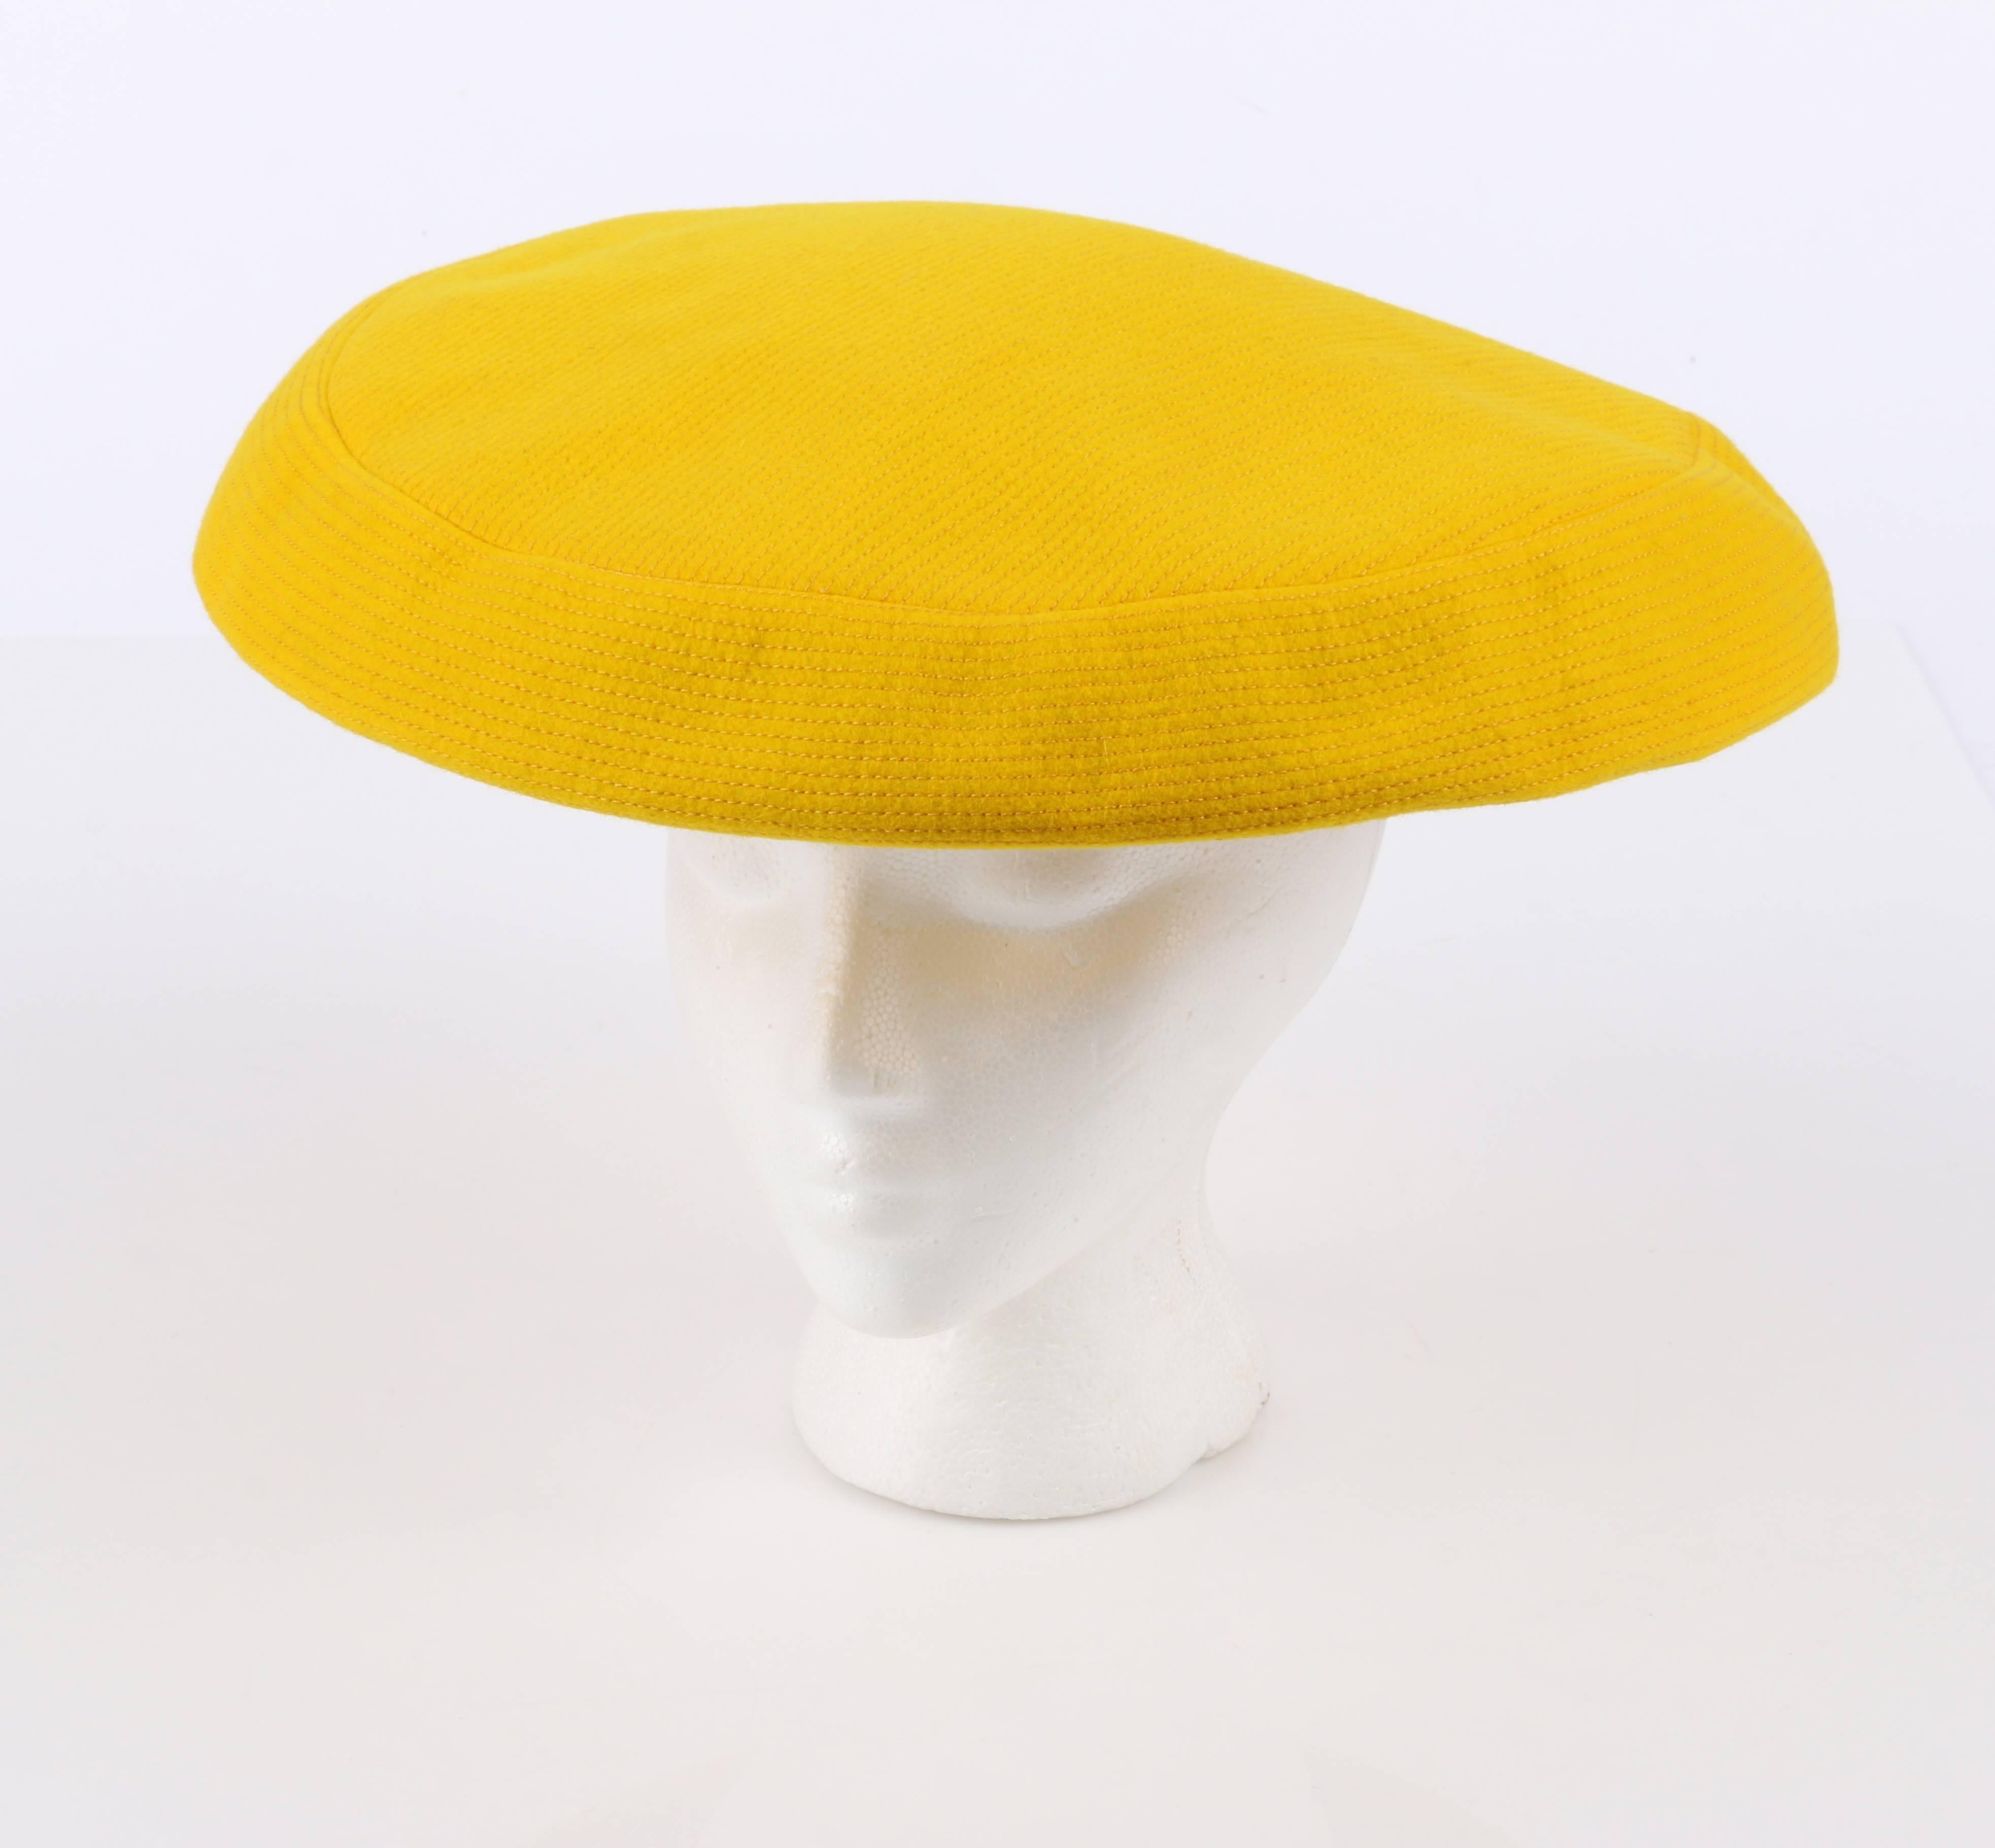 Vintage late c.1960's Yves Saint Laurent for Bergdorf Goodman yellow wool tam style hat. Yellow wool with yellow all over pin stripe top stitch detail. Wide flat top/brim. Two long wool ties with fringed ends. Elastic band at underside for snug fit.